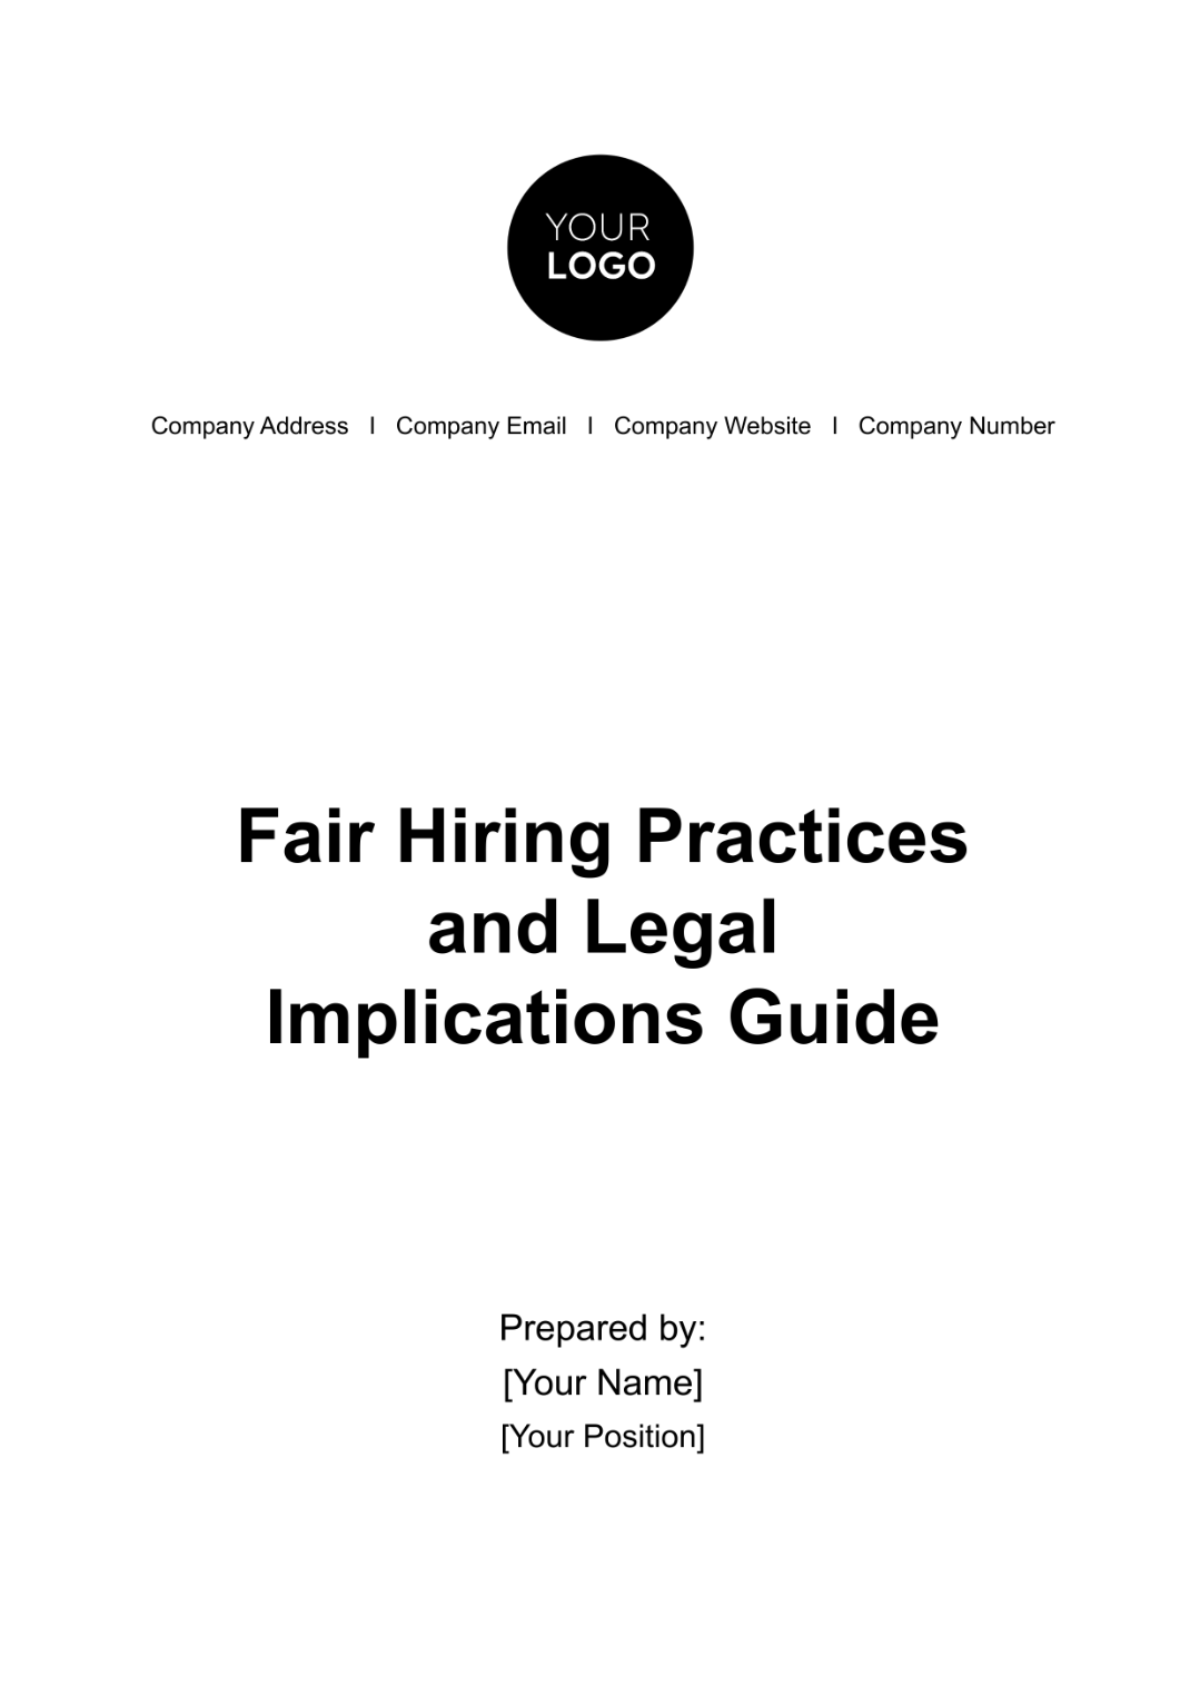 Free Fair Hiring Practices and Legal Implications Guide HR Template